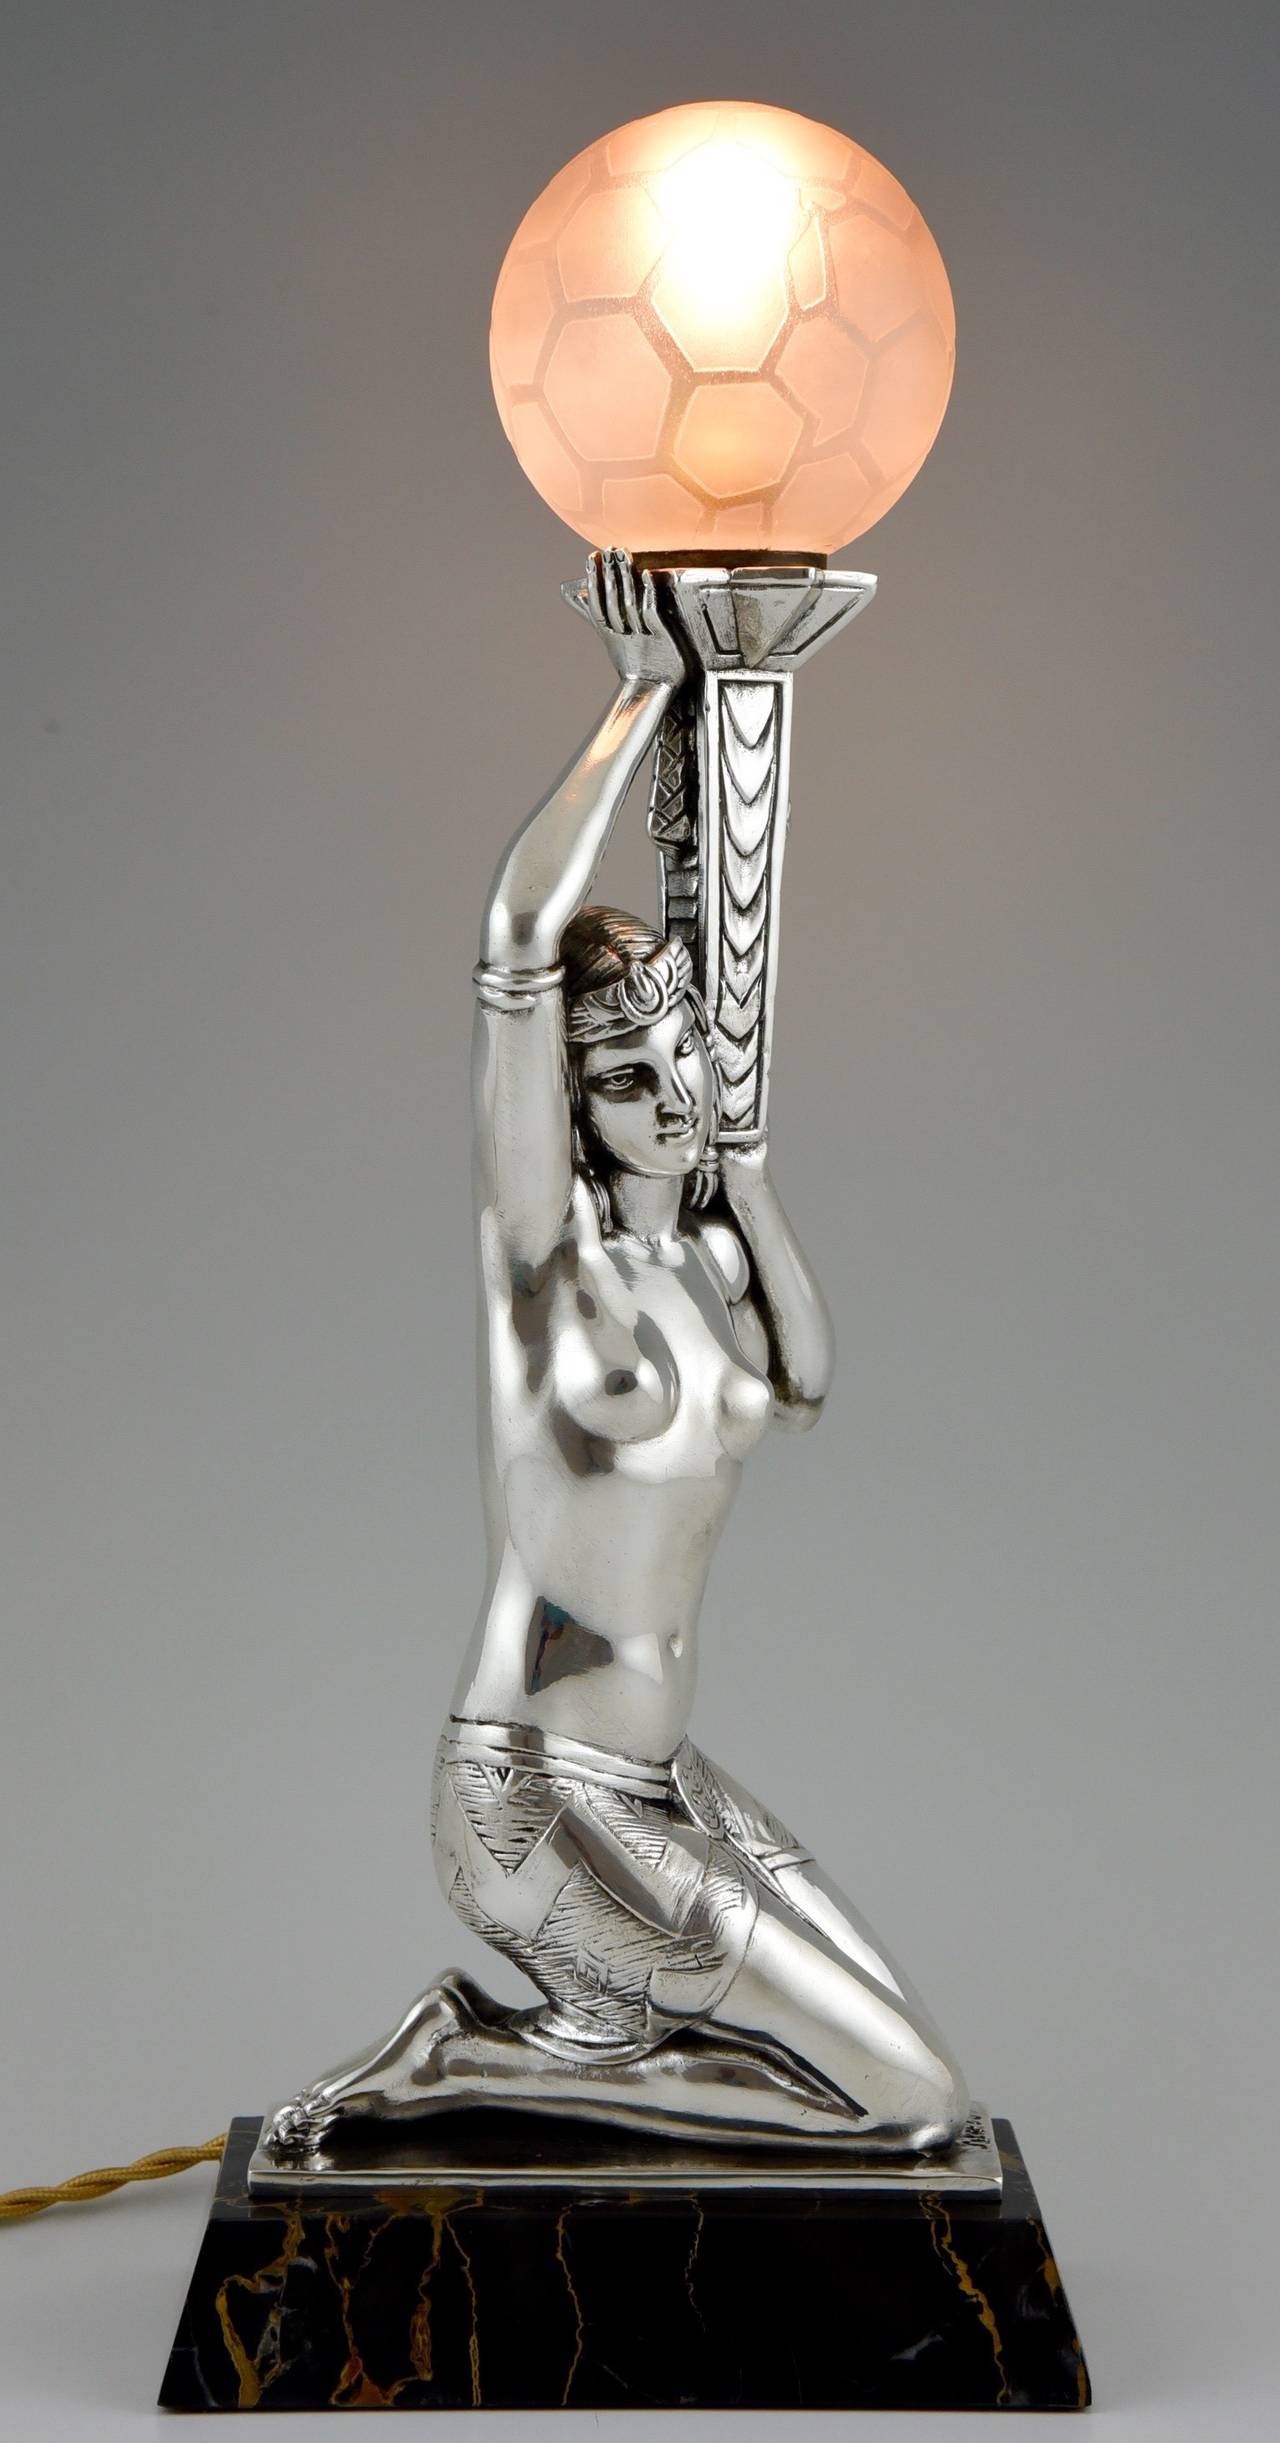 Art Deco figural table lamp of a seated nude holding a glass shade.
Signed by Salvado.
Date:  1930.
Material: Silvered metal. Portor marble base.  Glass shade. 
Origin:  France. 
Size:  
 H 16.1 inch x L 6.5 inch x W 3.3 inch.
H 41 cm. x L